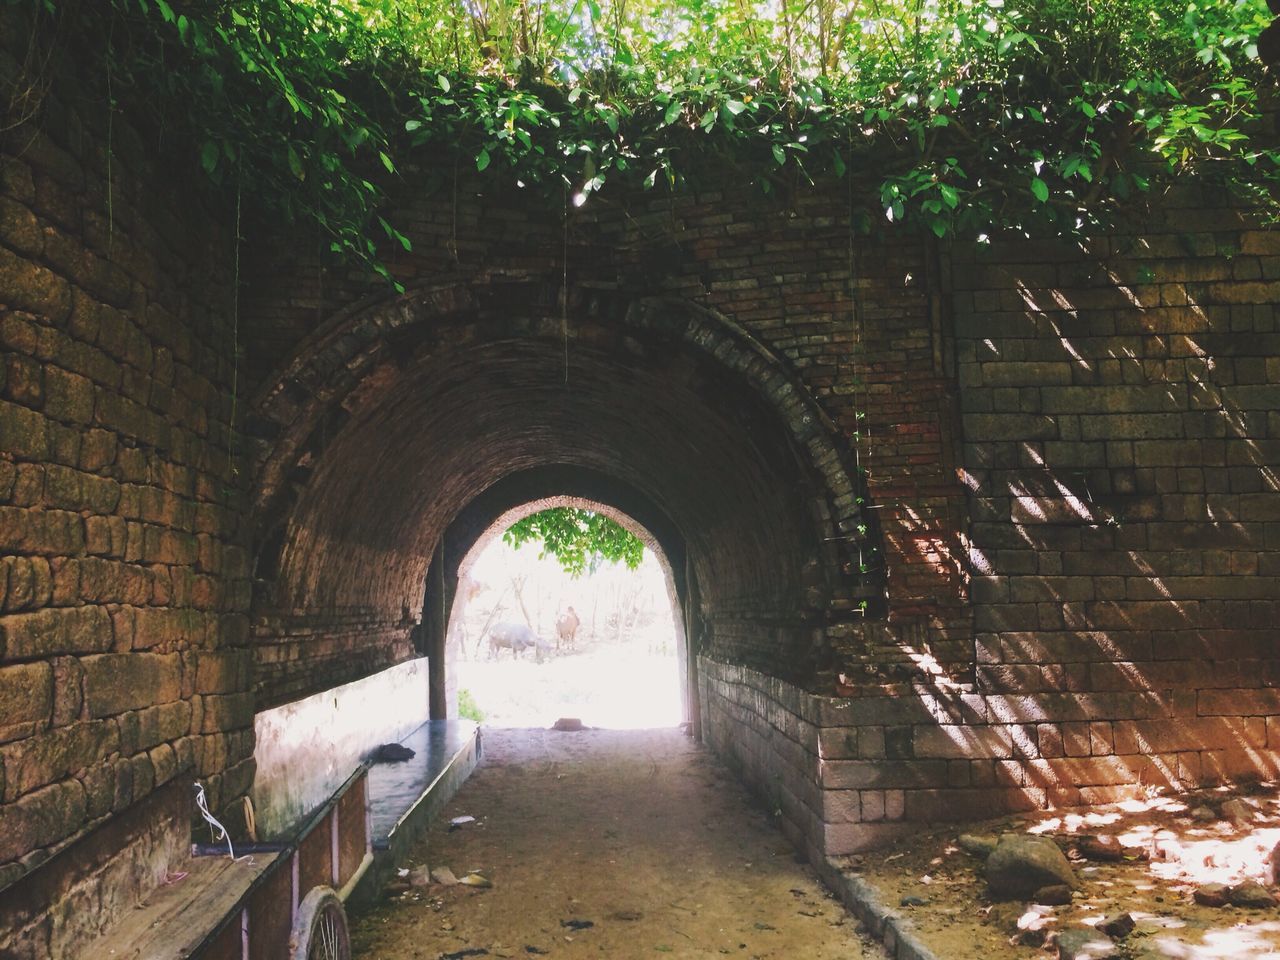 arch, architecture, built structure, the way forward, old, abandoned, tunnel, building exterior, archway, brick wall, wall - building feature, tree, obsolete, deterioration, stone wall, entrance, indoors, day, damaged, run-down